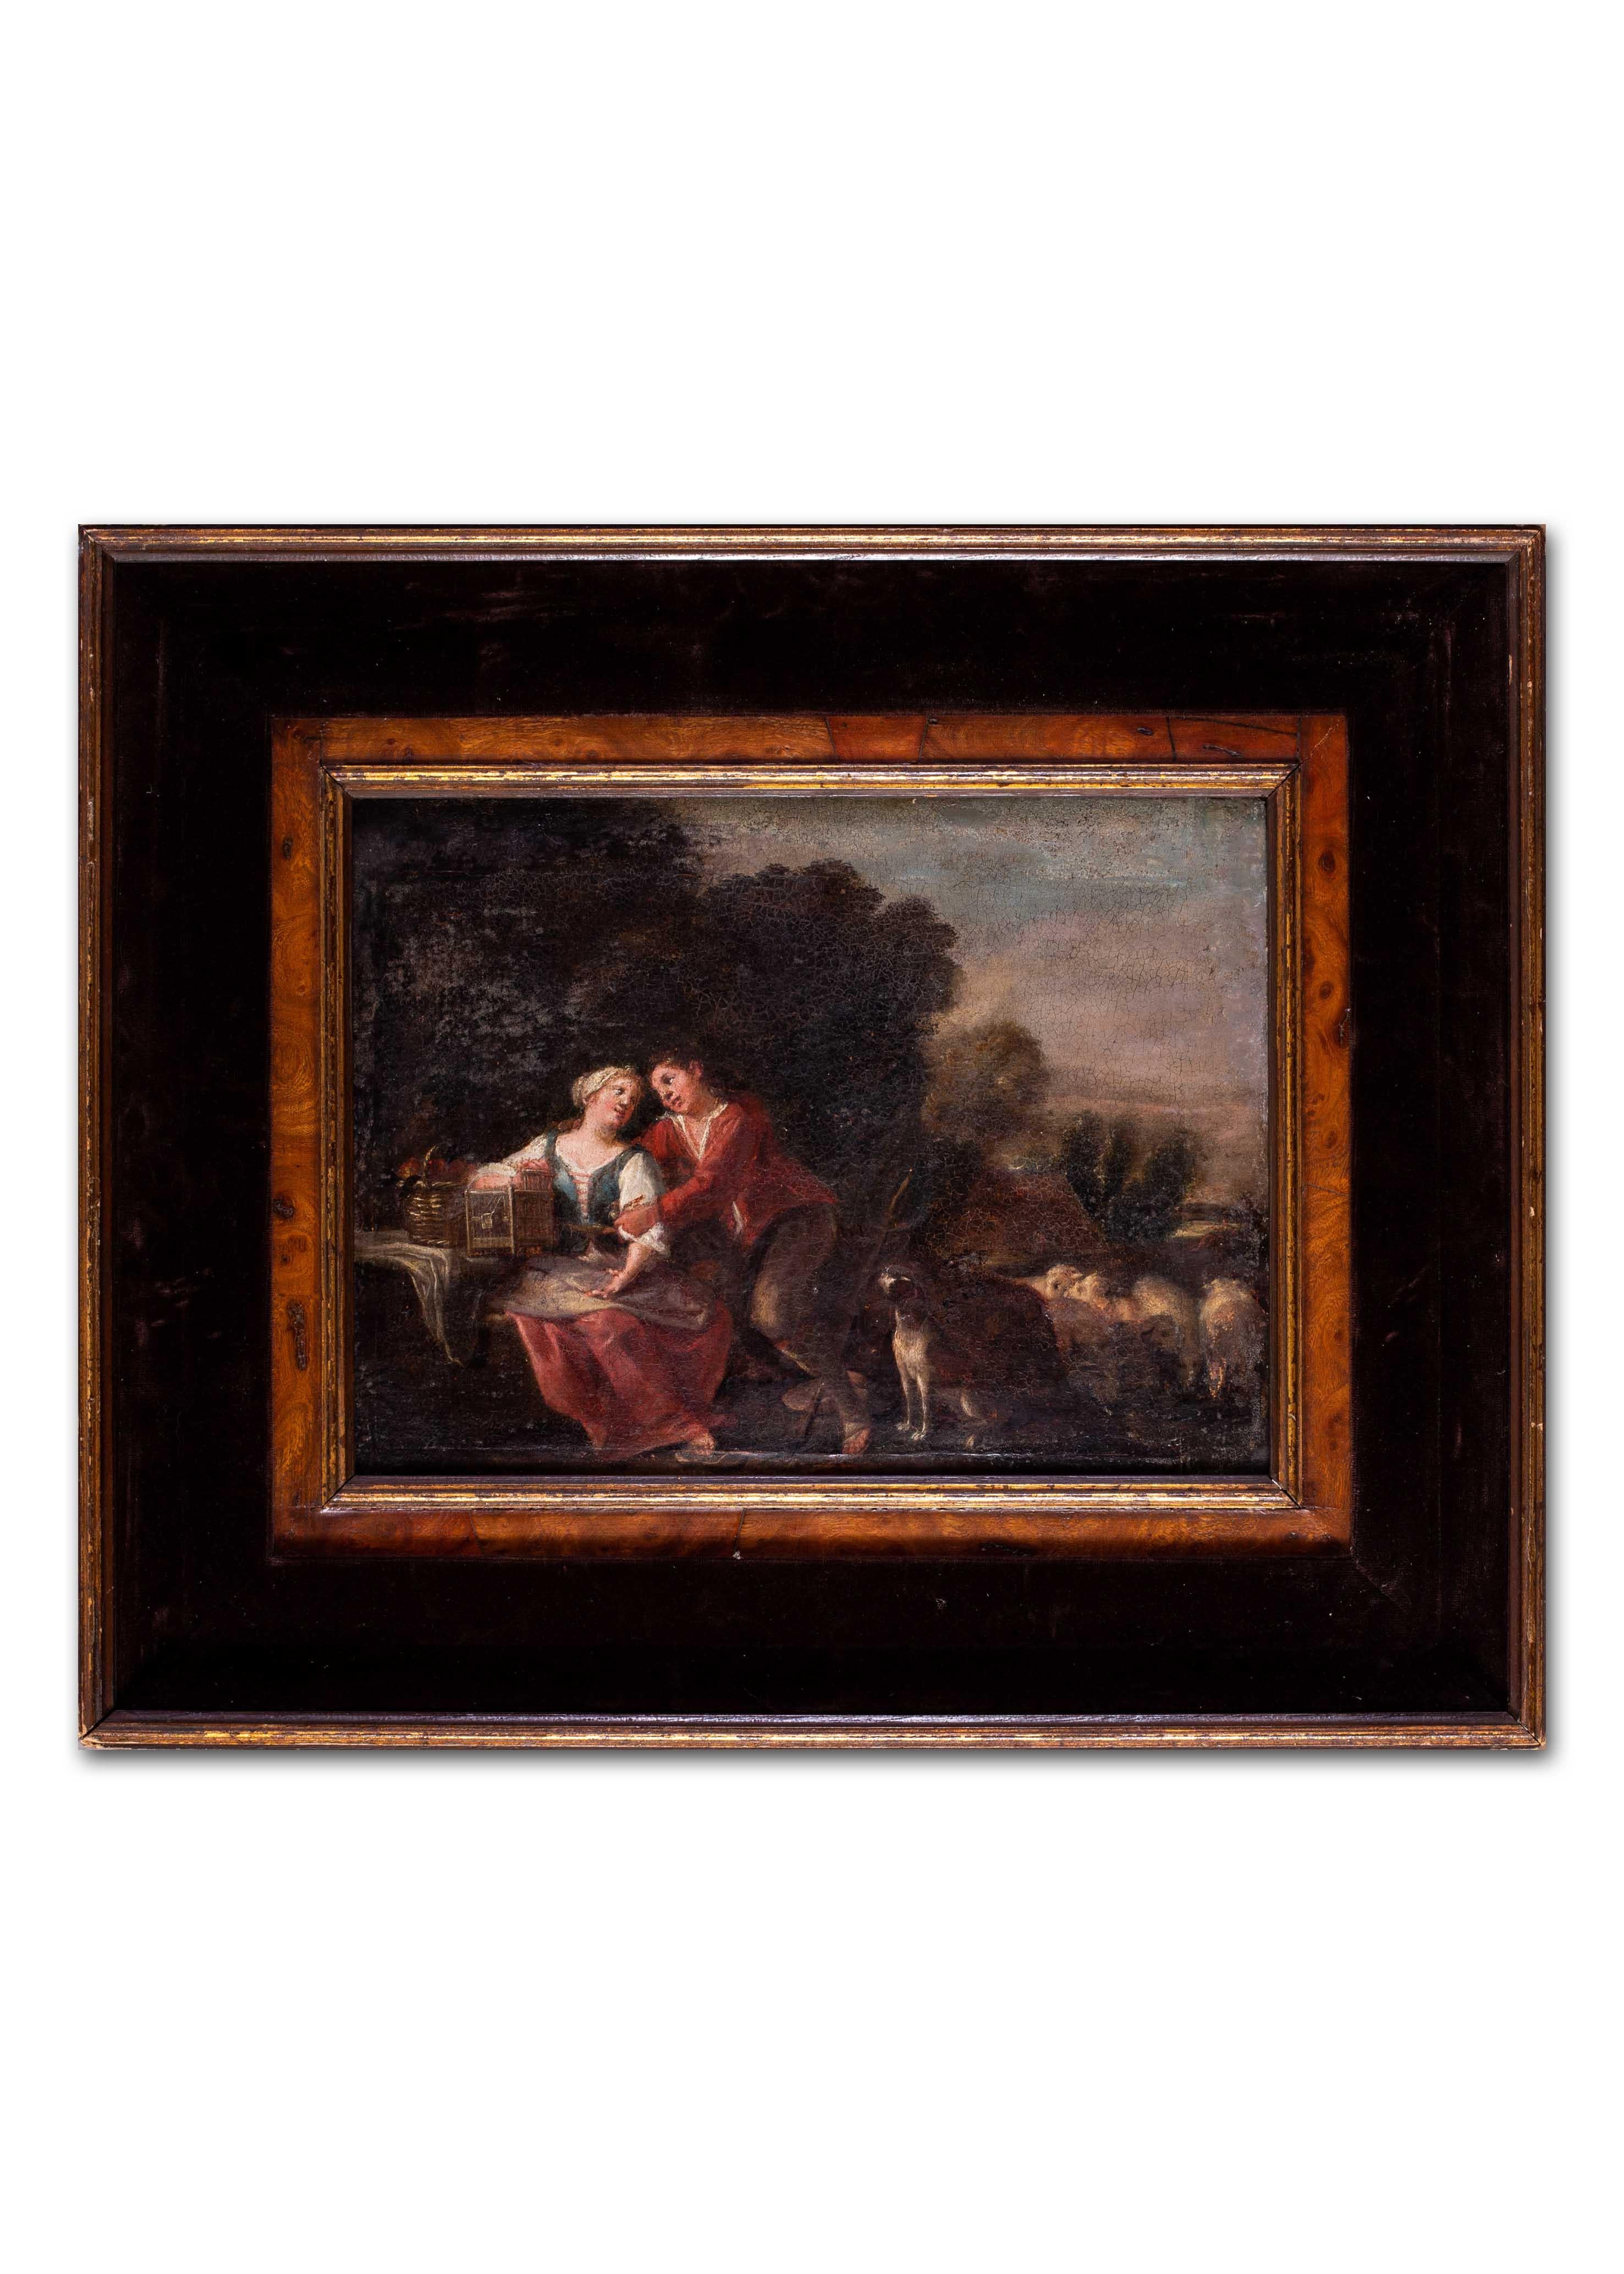 Unknown Figurative Painting - 18th Century English school oil painting of lovers